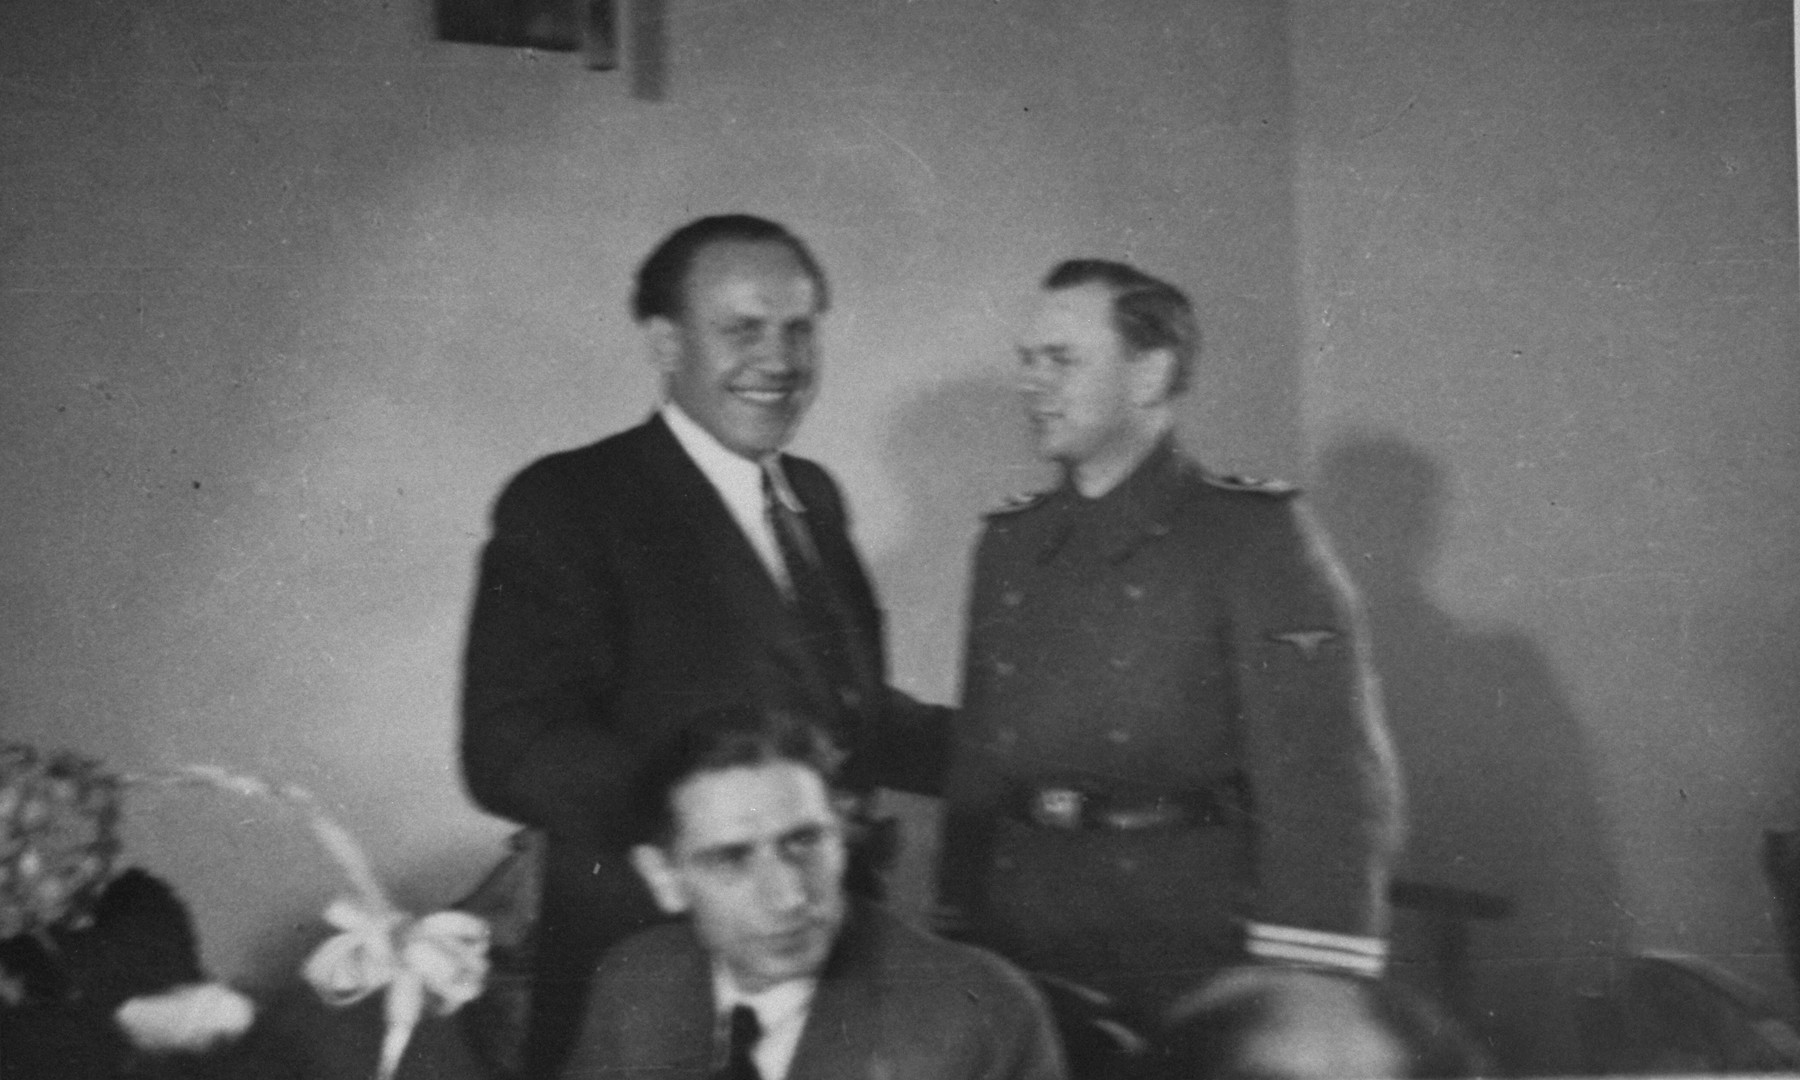 Oskar Schindler at a dinner party in Krakow with an SS officer.  

At parties like this, Schindler made contact with various SS and German officials, which often led to tips about impending deportations that enabled him to save his laborers.